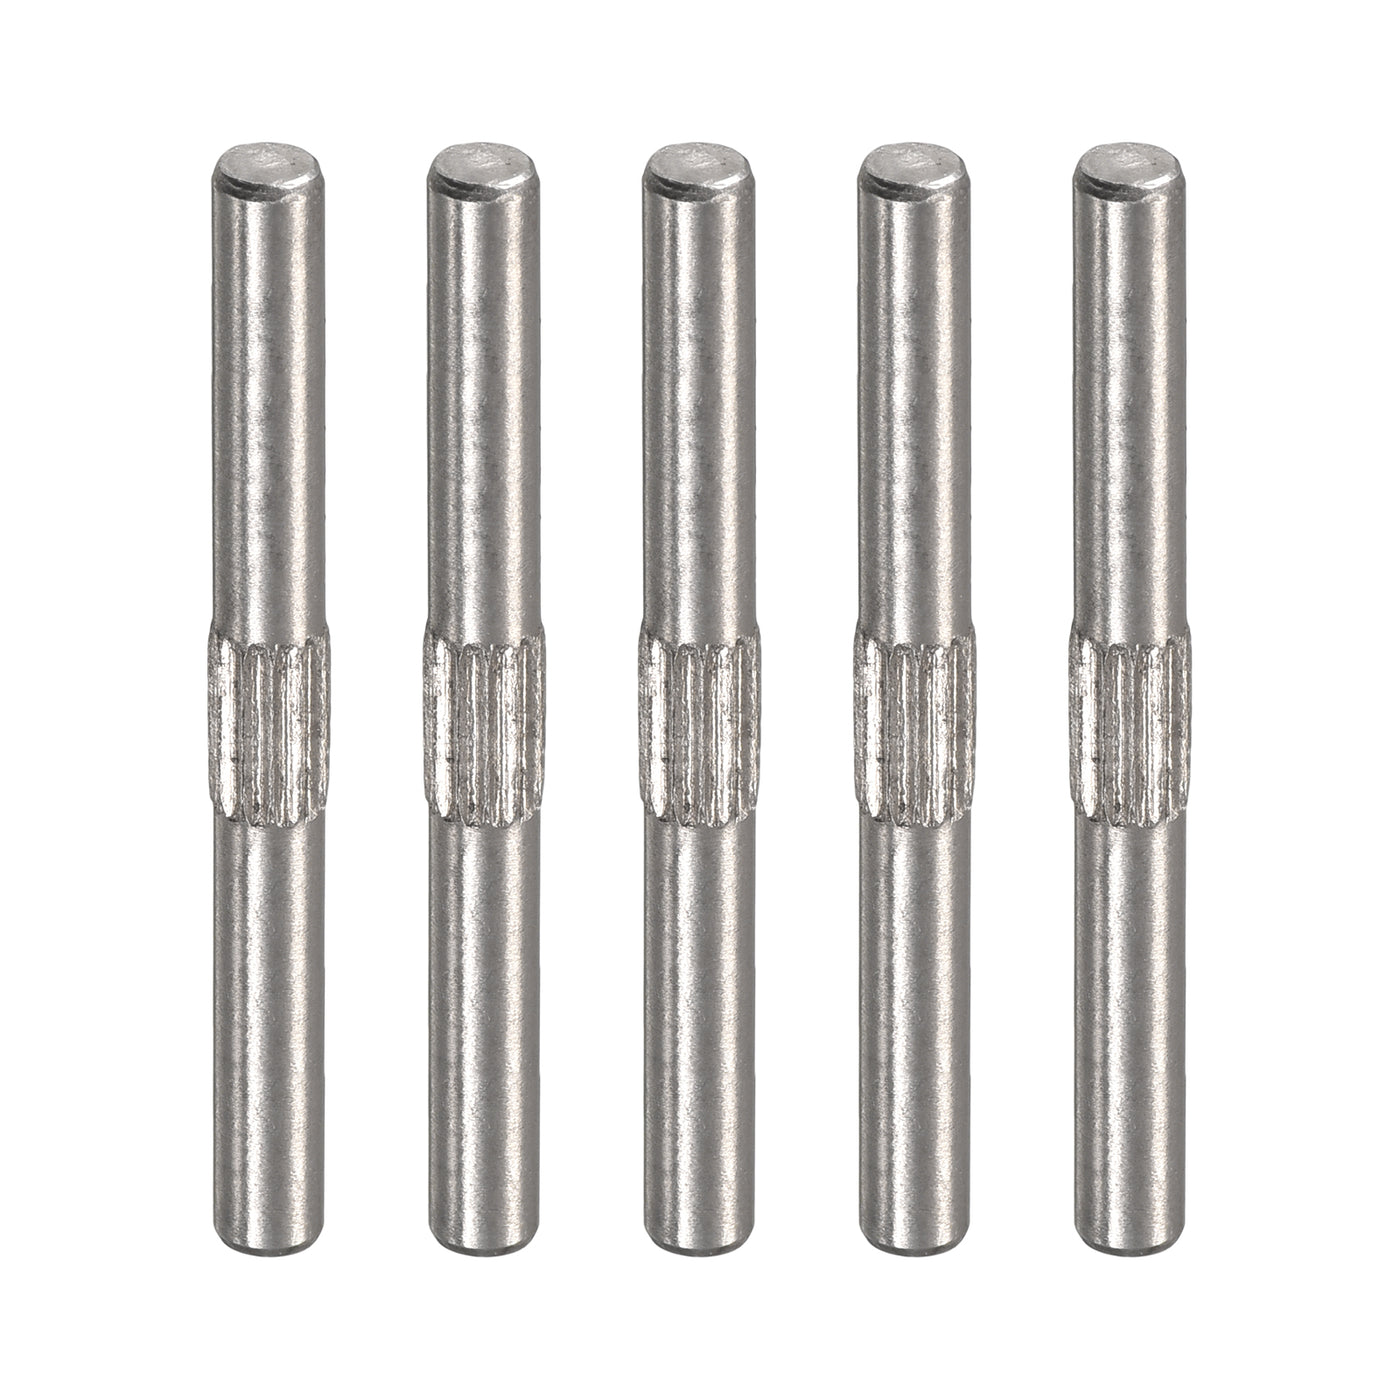 uxcell Uxcell 3x30mm 304 Stainless Steel Dowel Pins, 5Pcs Center Knurled Chamfered End Pin